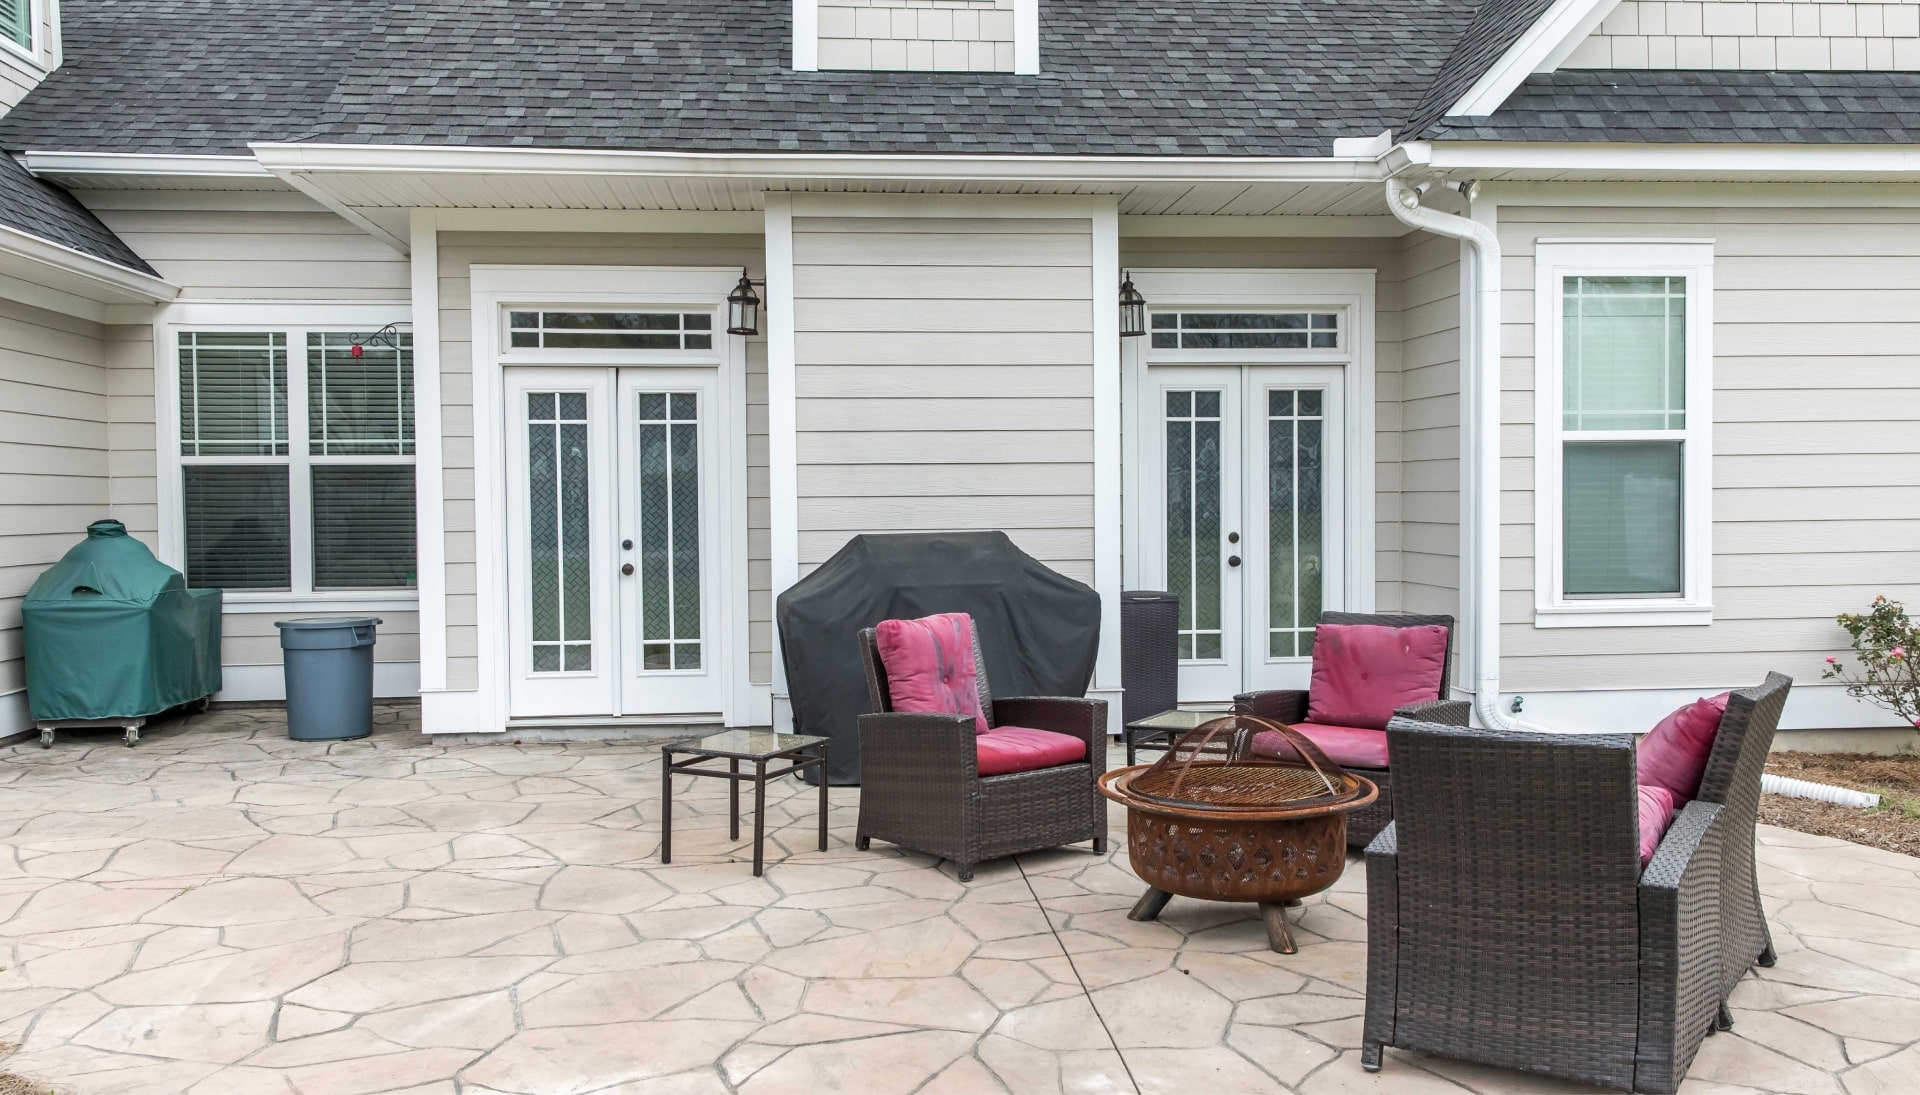 Elevate Your Outdoor Living Space with Stunning Stamped Concrete Patio in Harrisburg, PA - Choose from a Variety of Creative Patterns and Colors to Achieve a Unique and Eye-Catching Look for Your Patio with Long-Lasting Durability and Low-Maintenance.